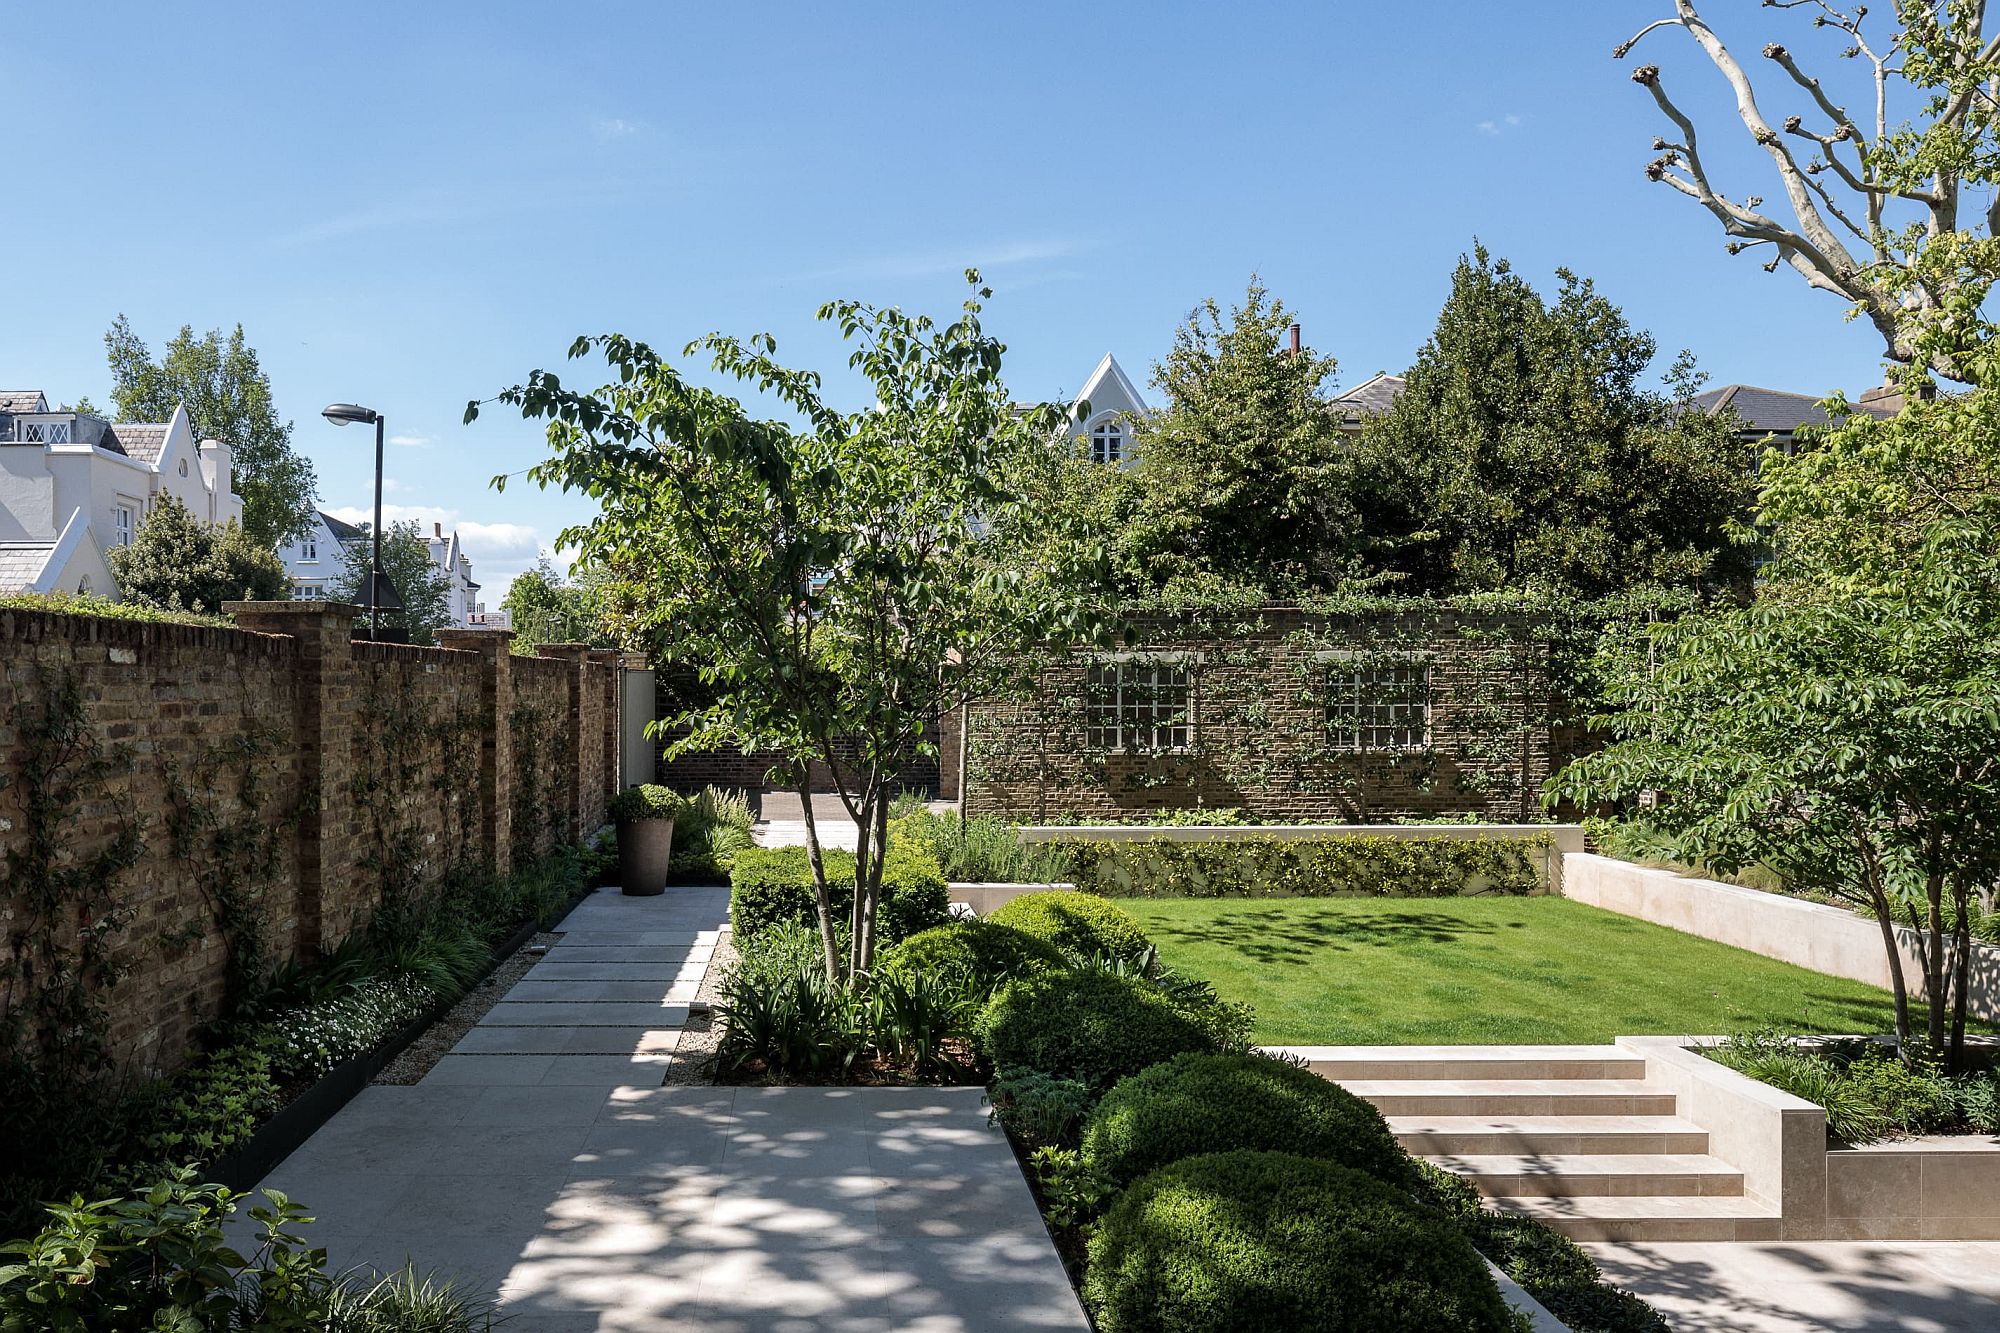 Multi-level-gardens-with-a-curated-landscape-add-to-the-appeal-of-the-house